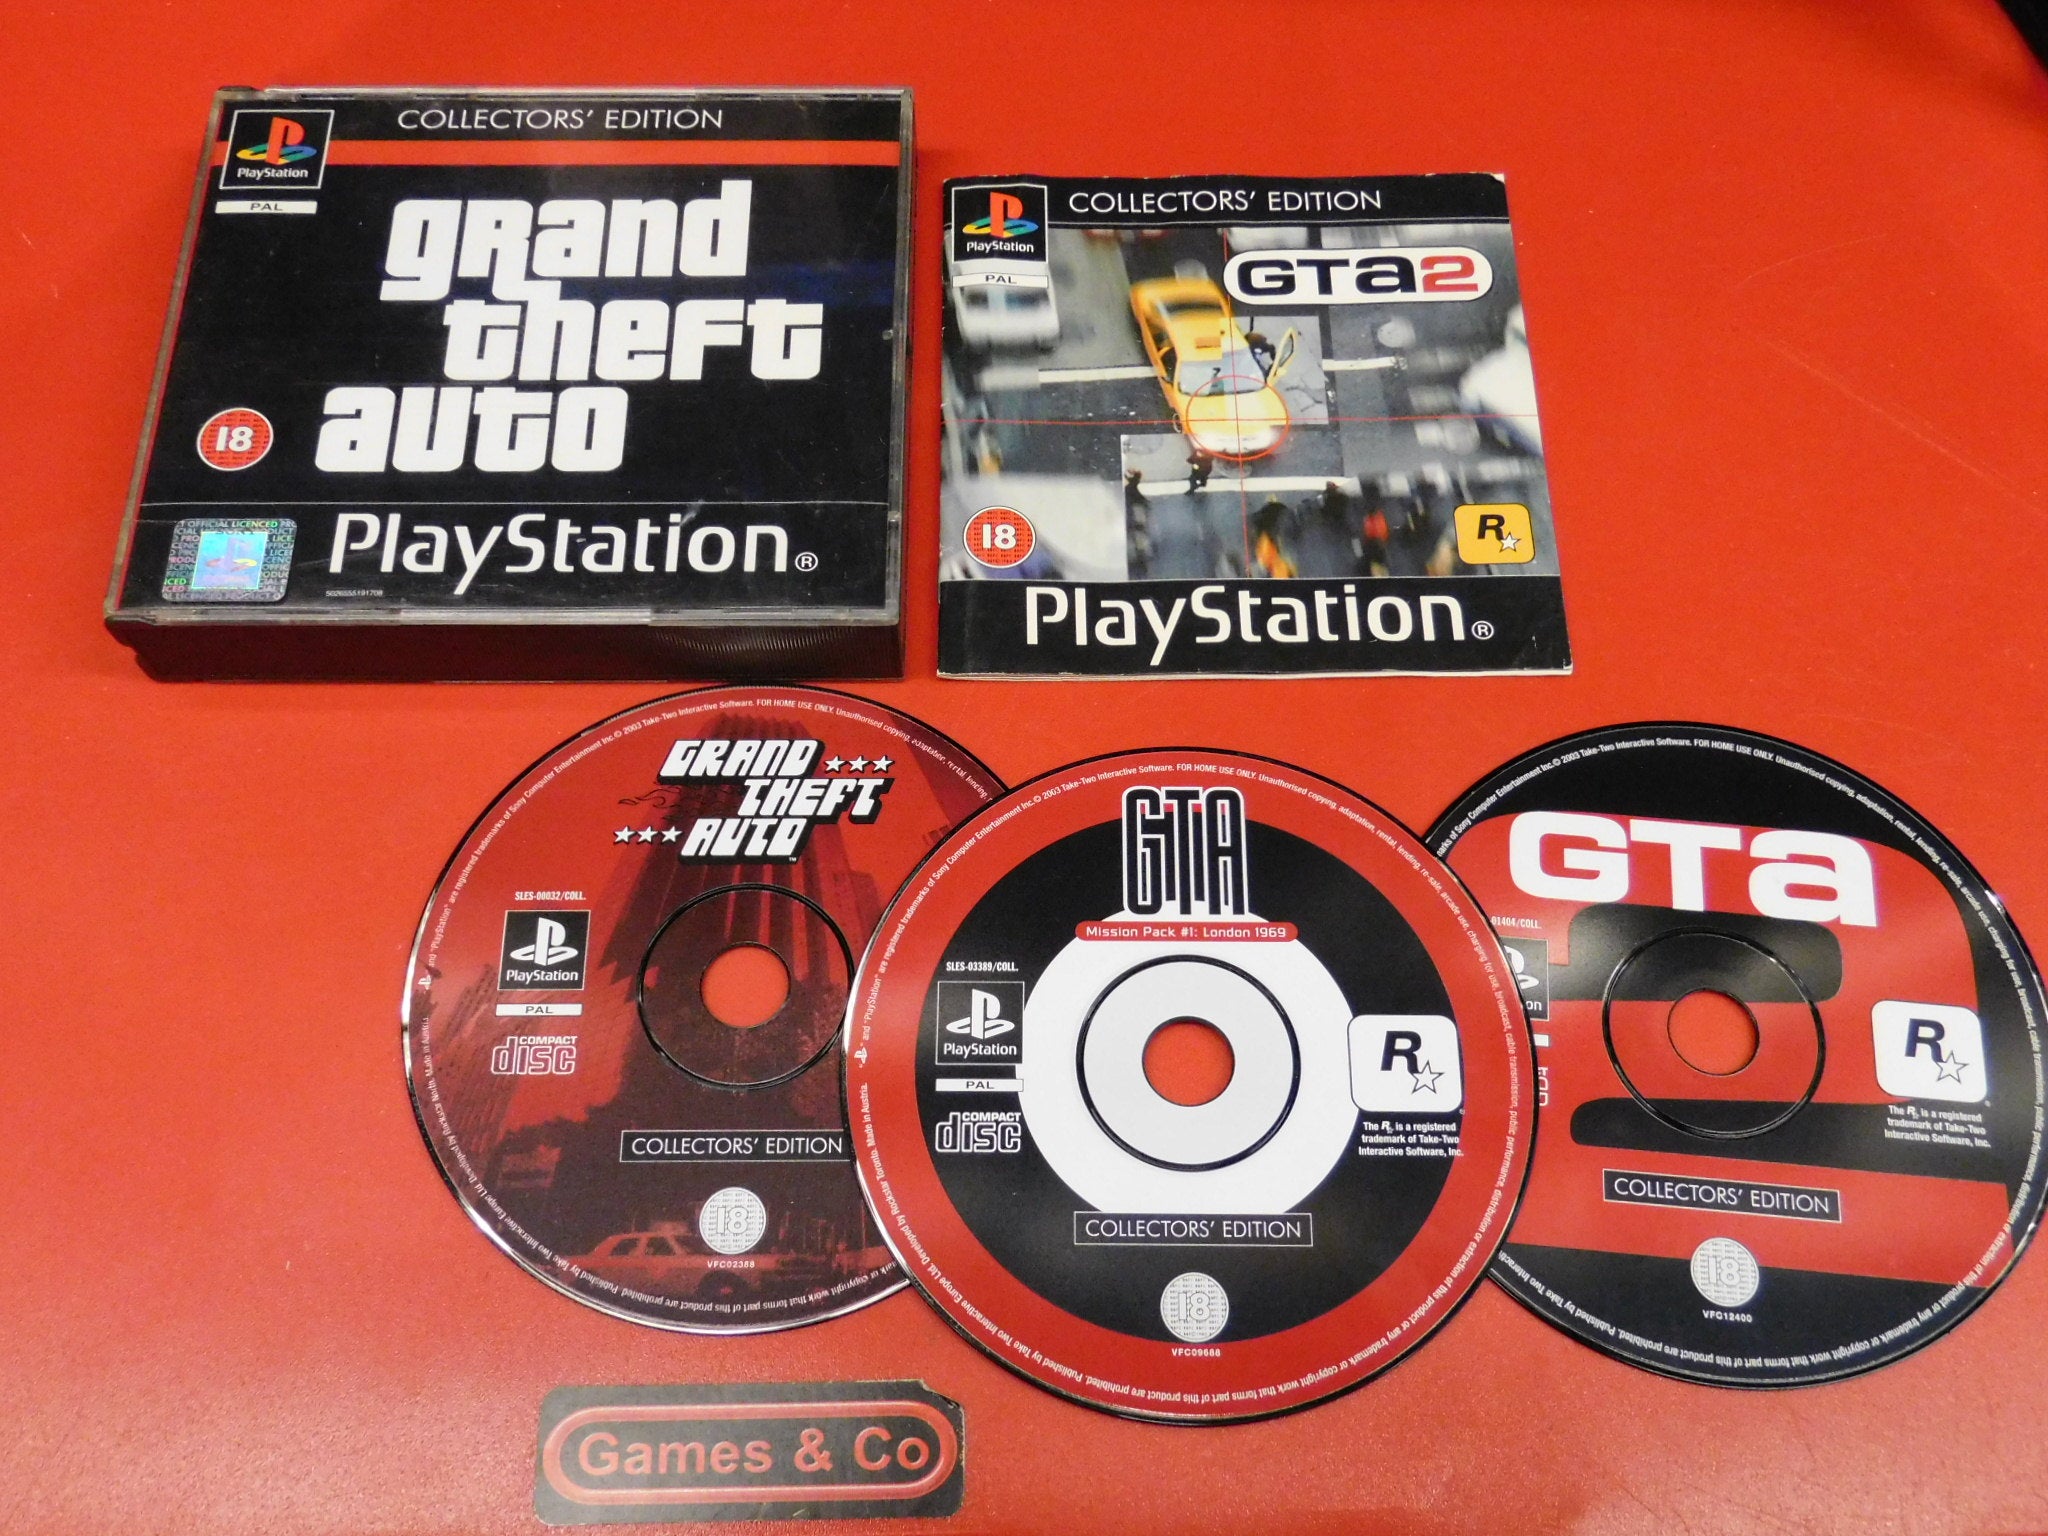 GRAND THEFT AUTO COLLECTOR'S EDITION